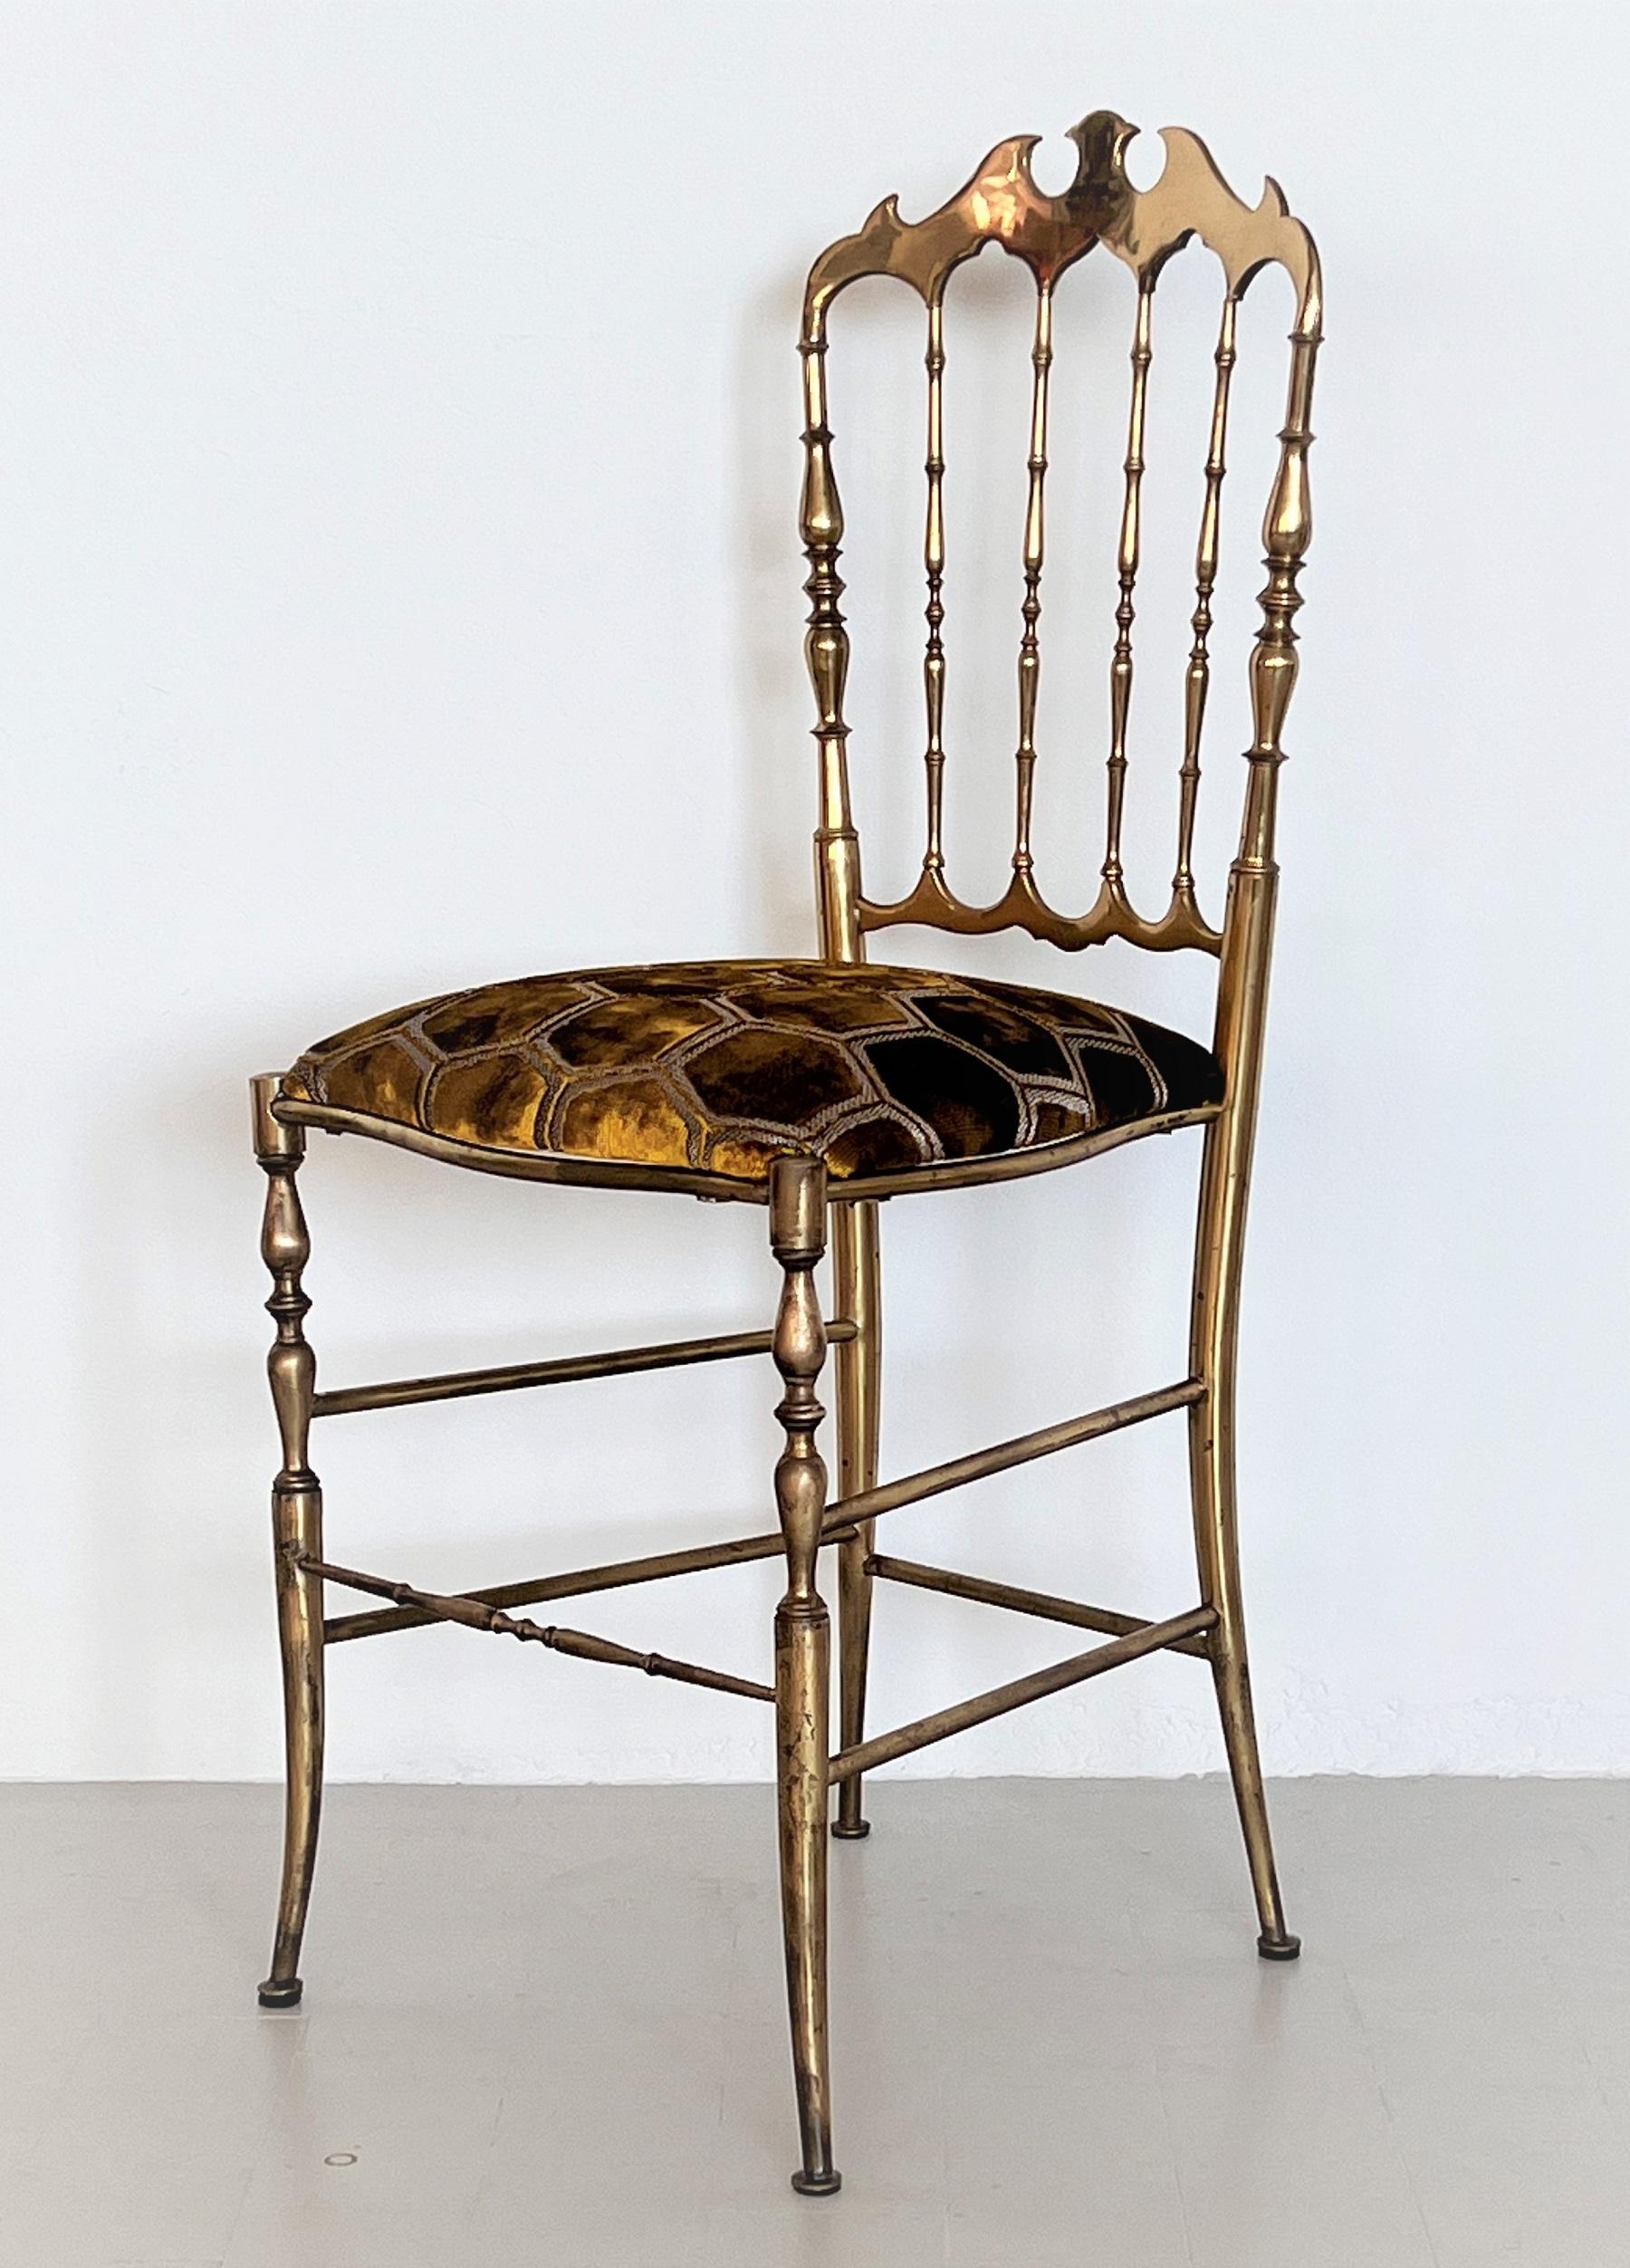 20th Century Italian Mid-Century Chiavari Chair in Full Brass with New Upholstery, 1970s For Sale